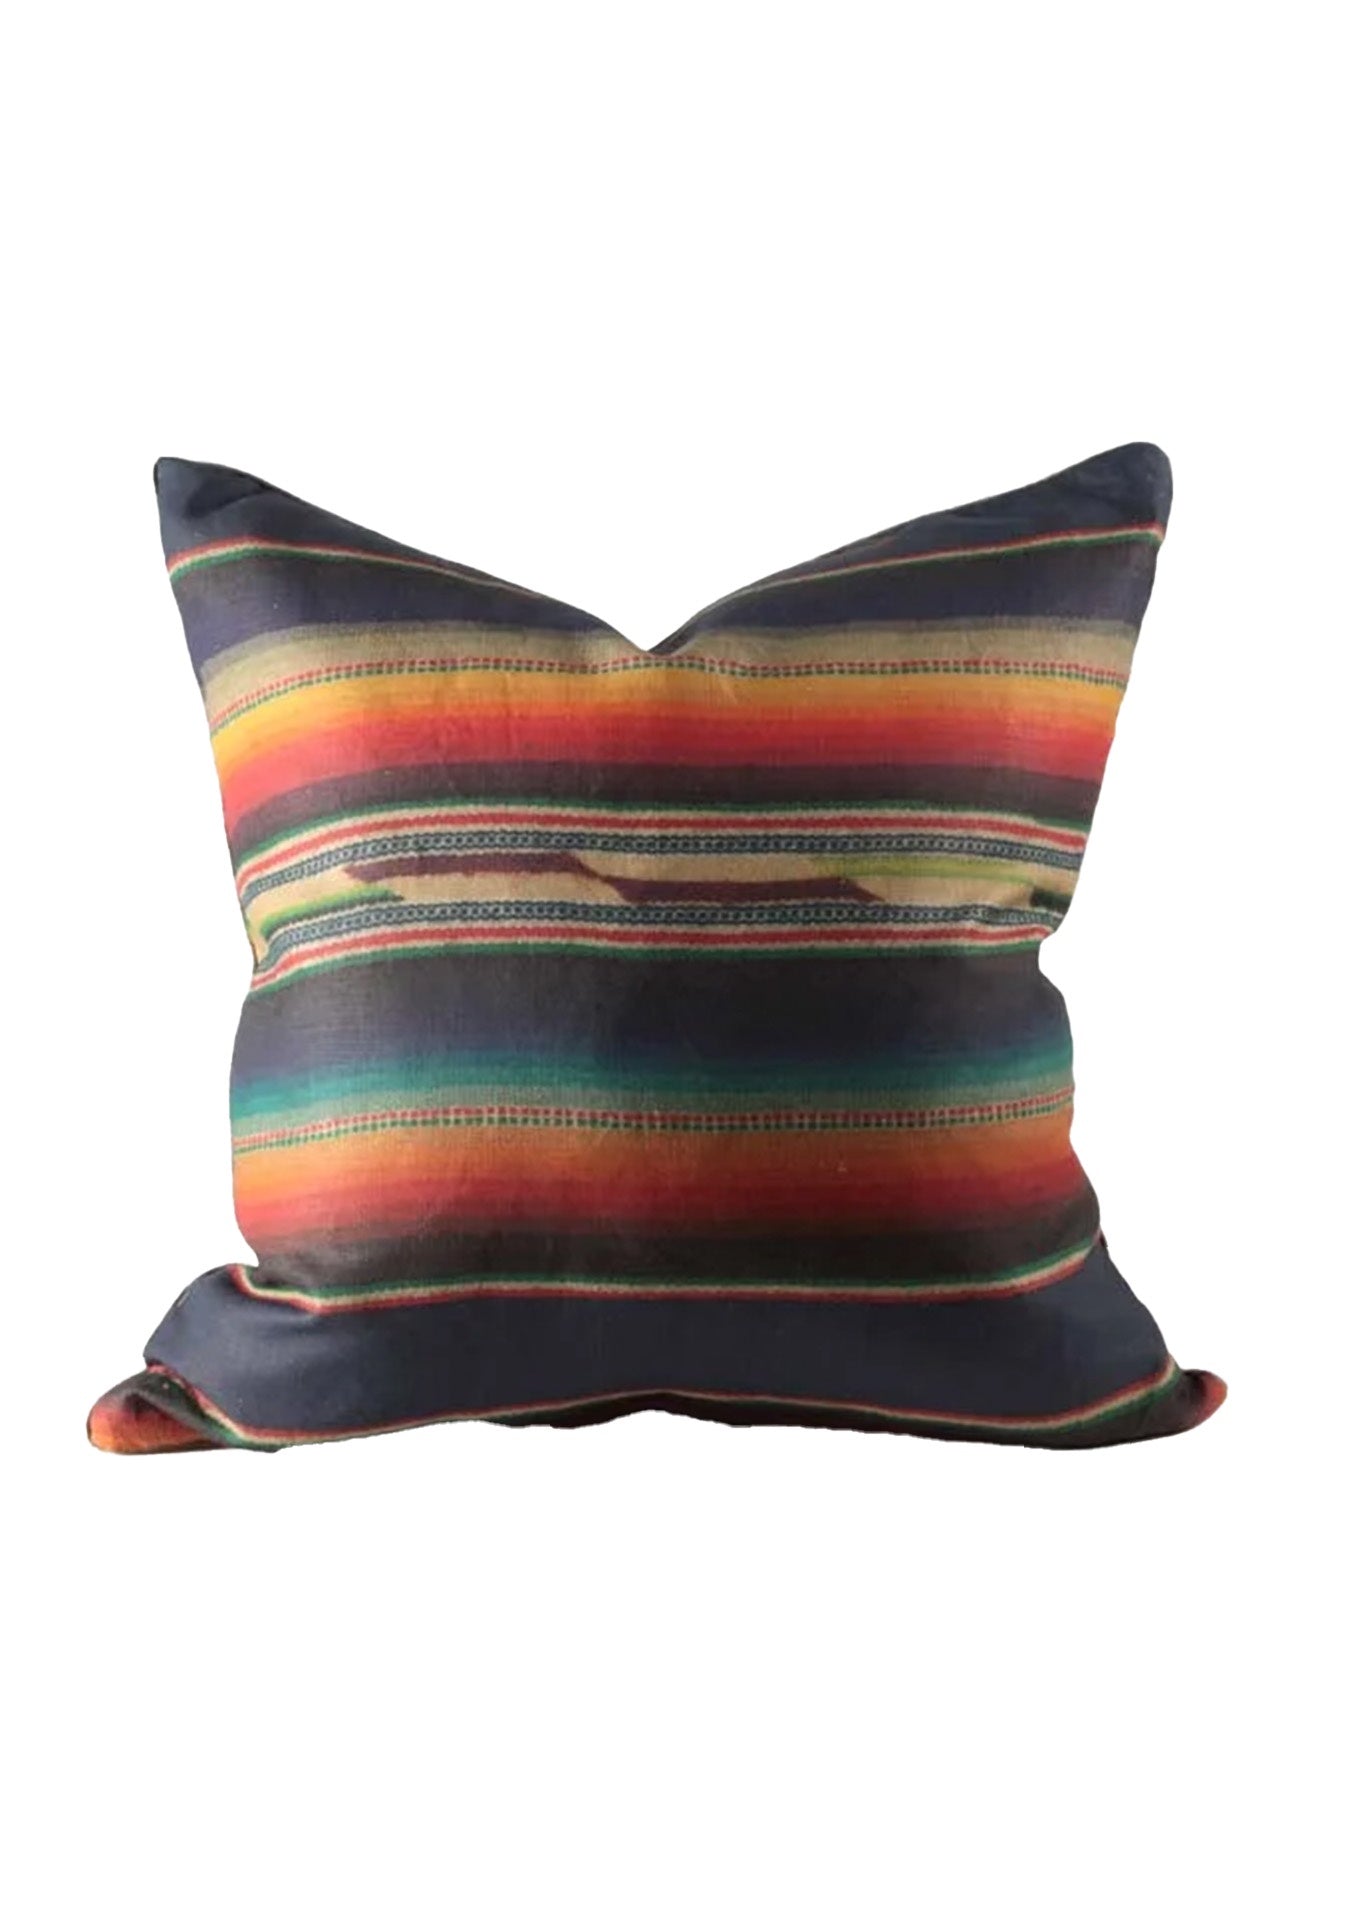 Decorative pillow with colorful horizontal stripes in various shades of red, blue, yellow, and green, isolated on a white background, perfect for Arizona-style home decor. The SW Multi Colored Serape 26 x 26 pillow from Design Legacy.